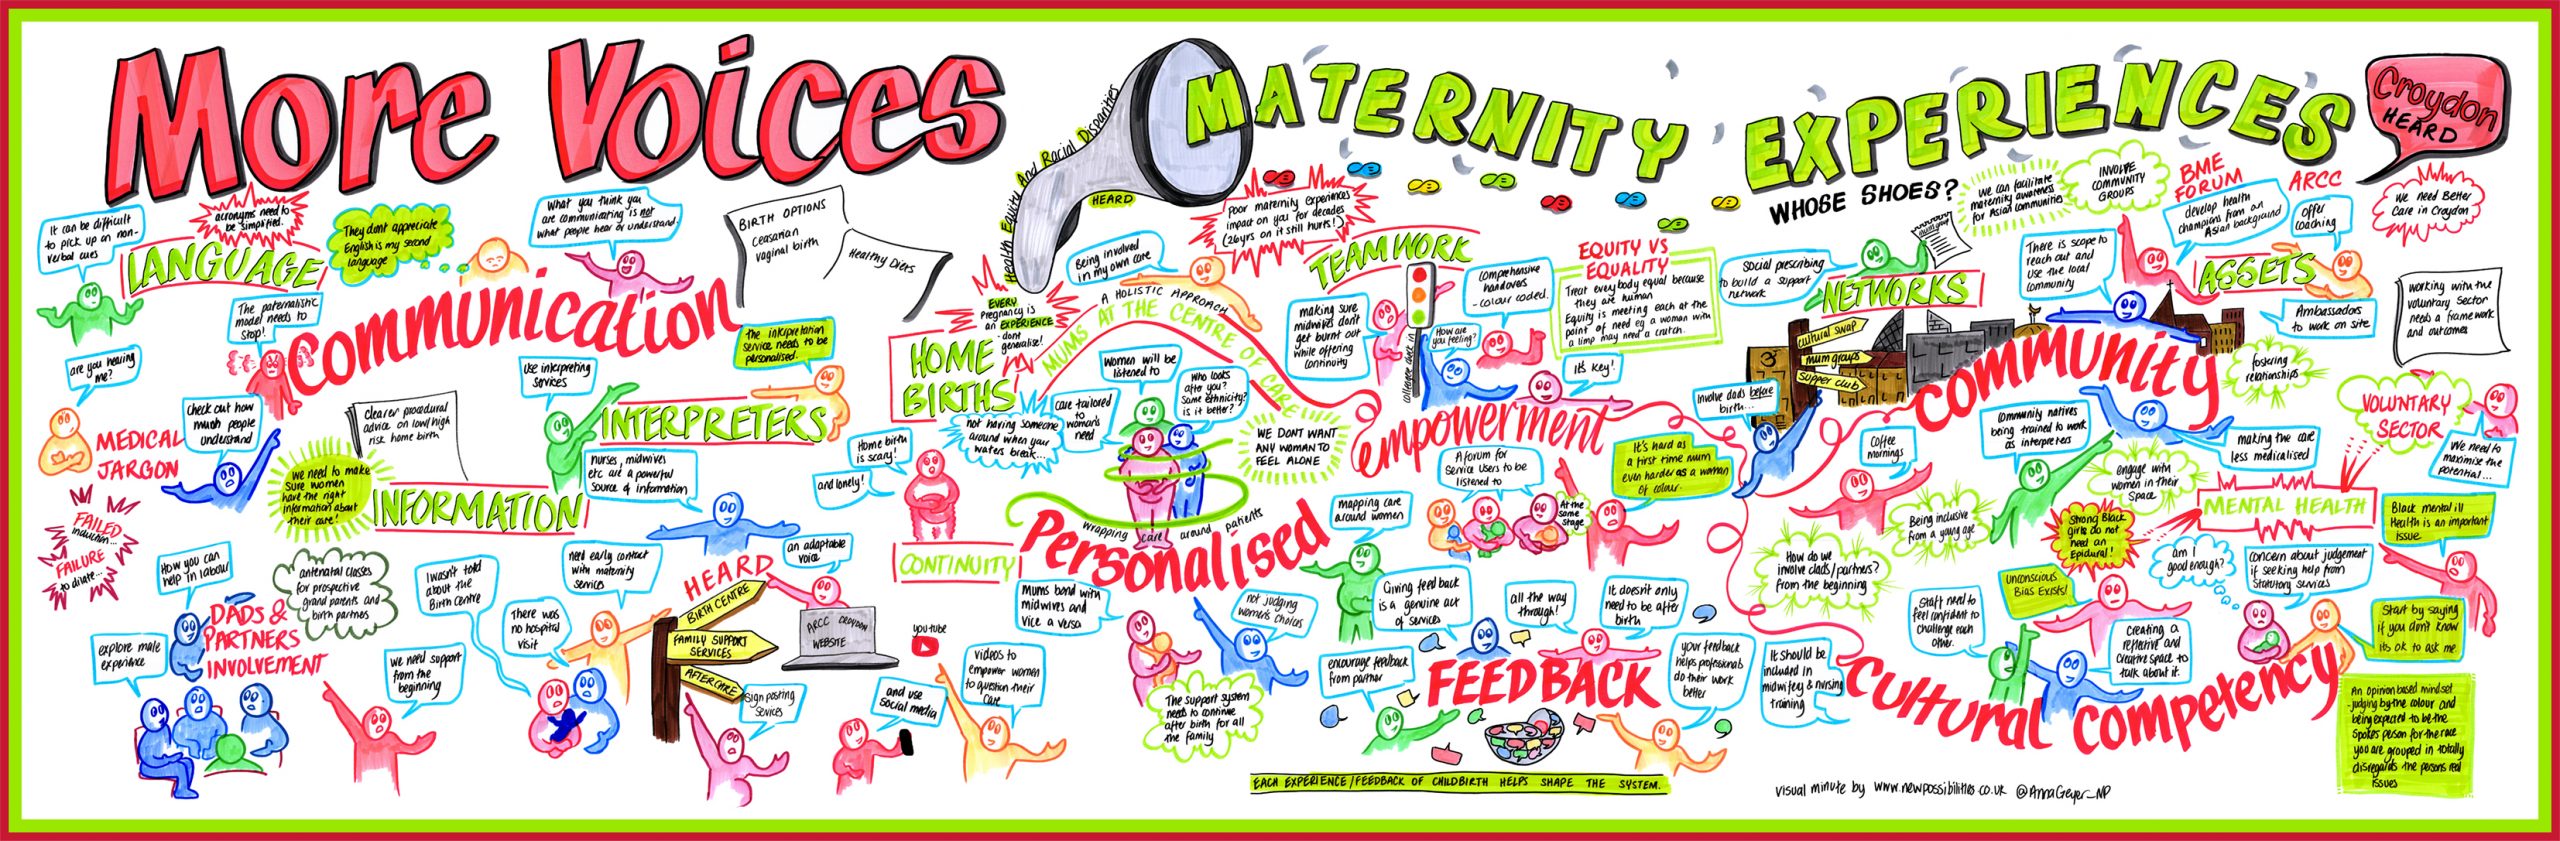 Poster illustrating key themes from Whose Shoes event including language, information, partner involvement, interpreters, home births, empowerment, personalised care, feedback, community and cultural competency